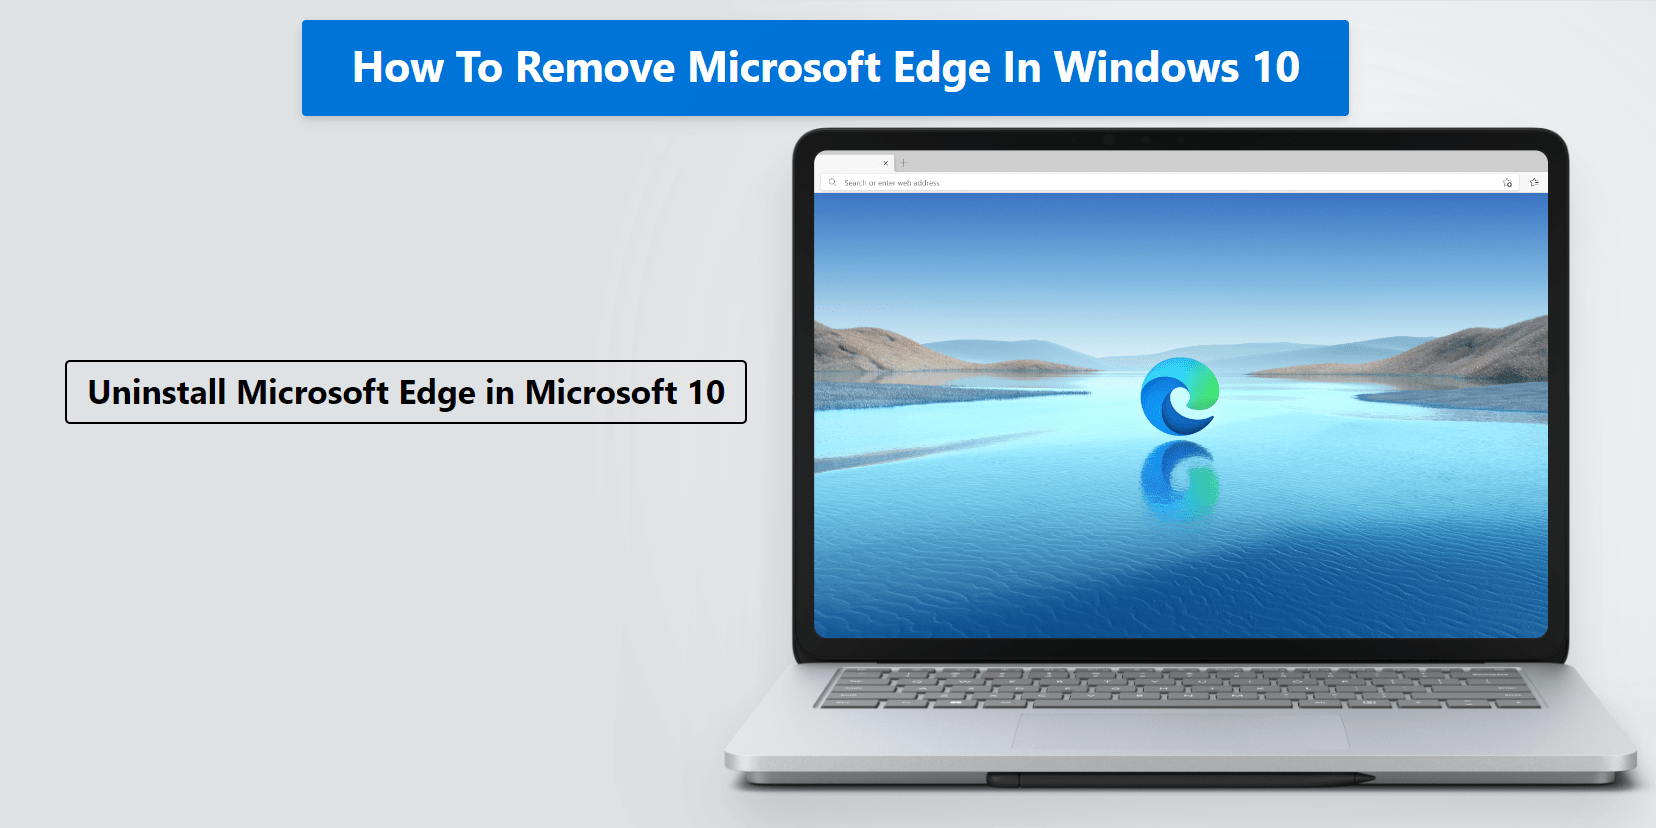 Learn how to remove Microsoft Edge from Windows 10